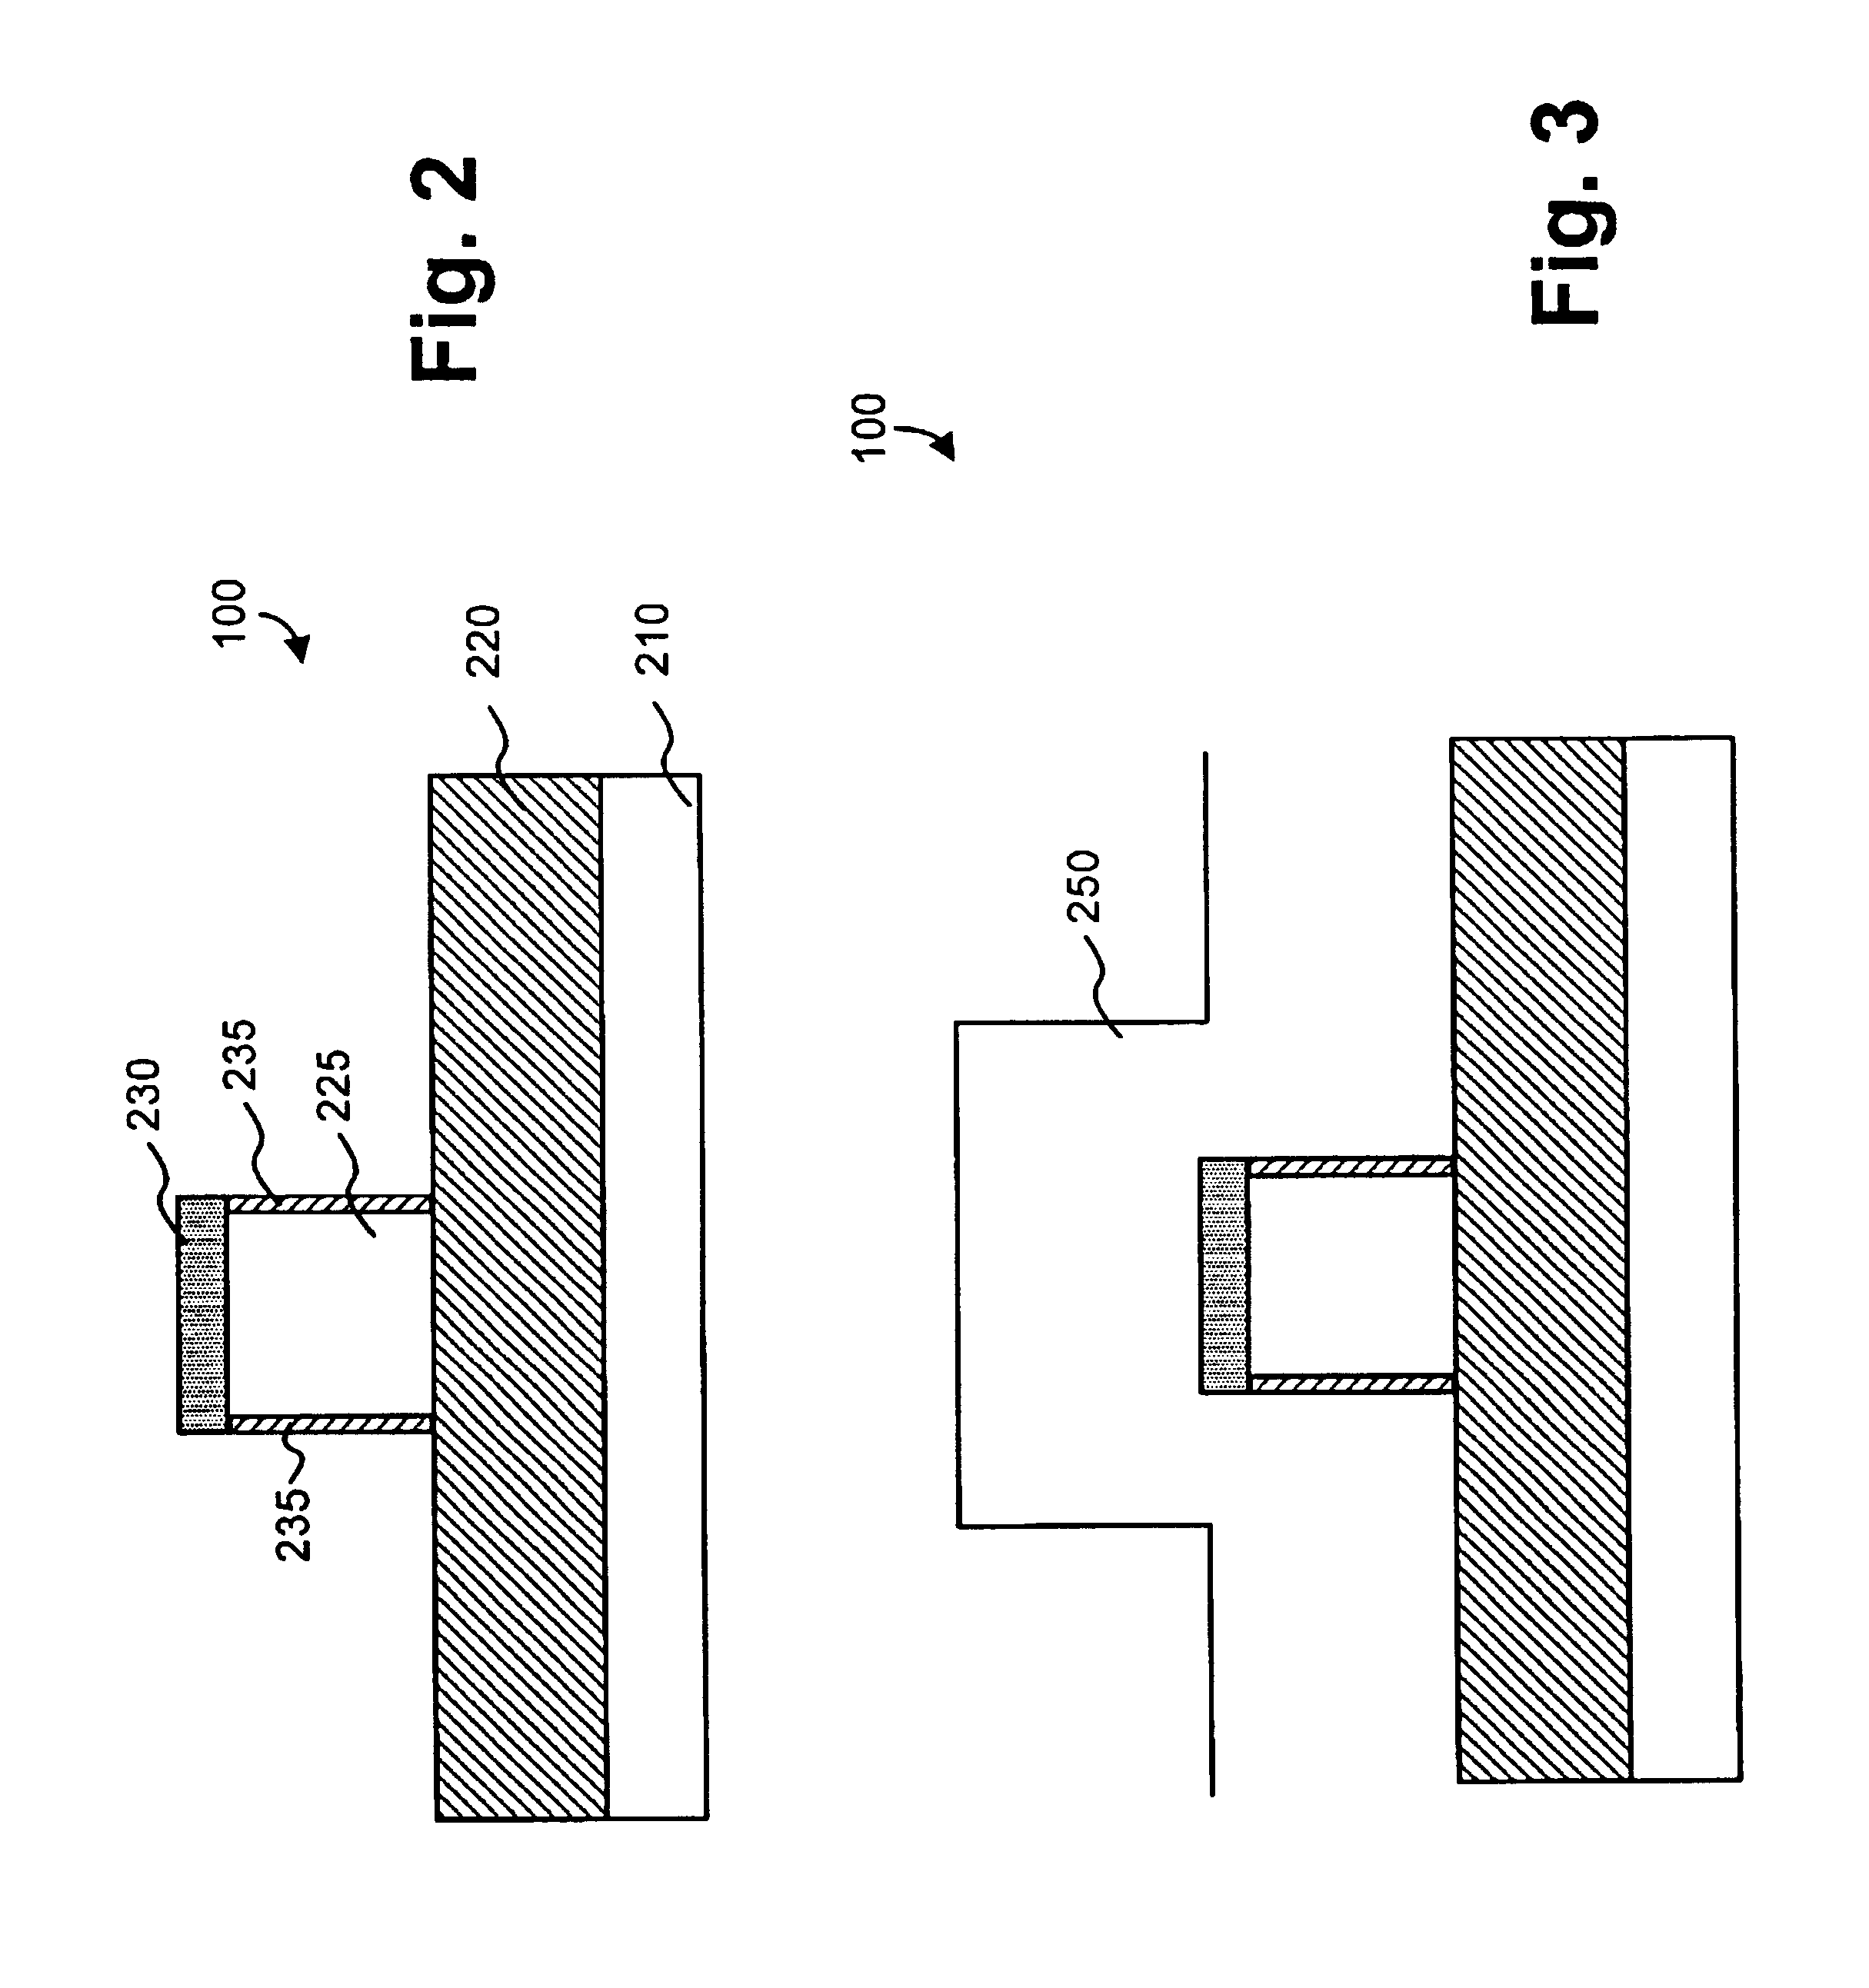 Uniformly doped source/drain junction in a double-gate MOSFET